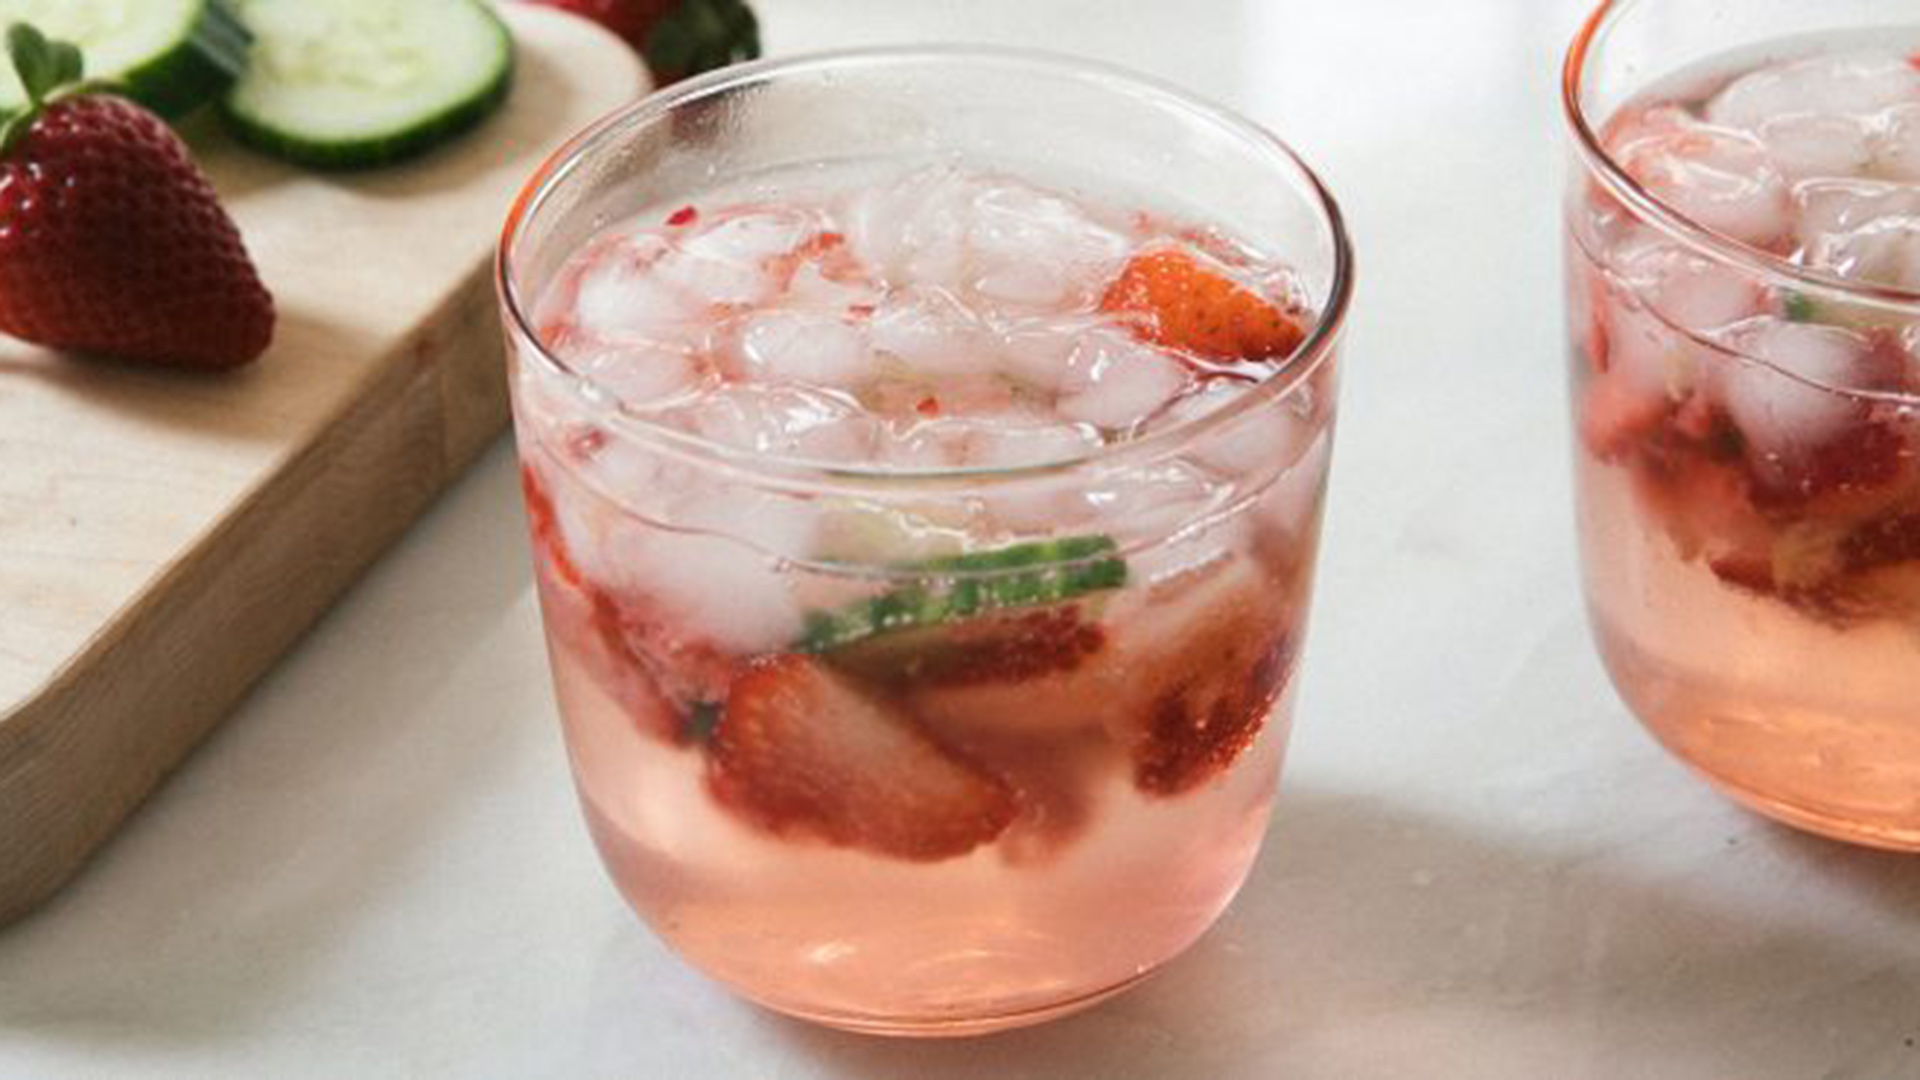 A clear glass cup filled with pink strawberry liquid, ice and sliced strawberries.